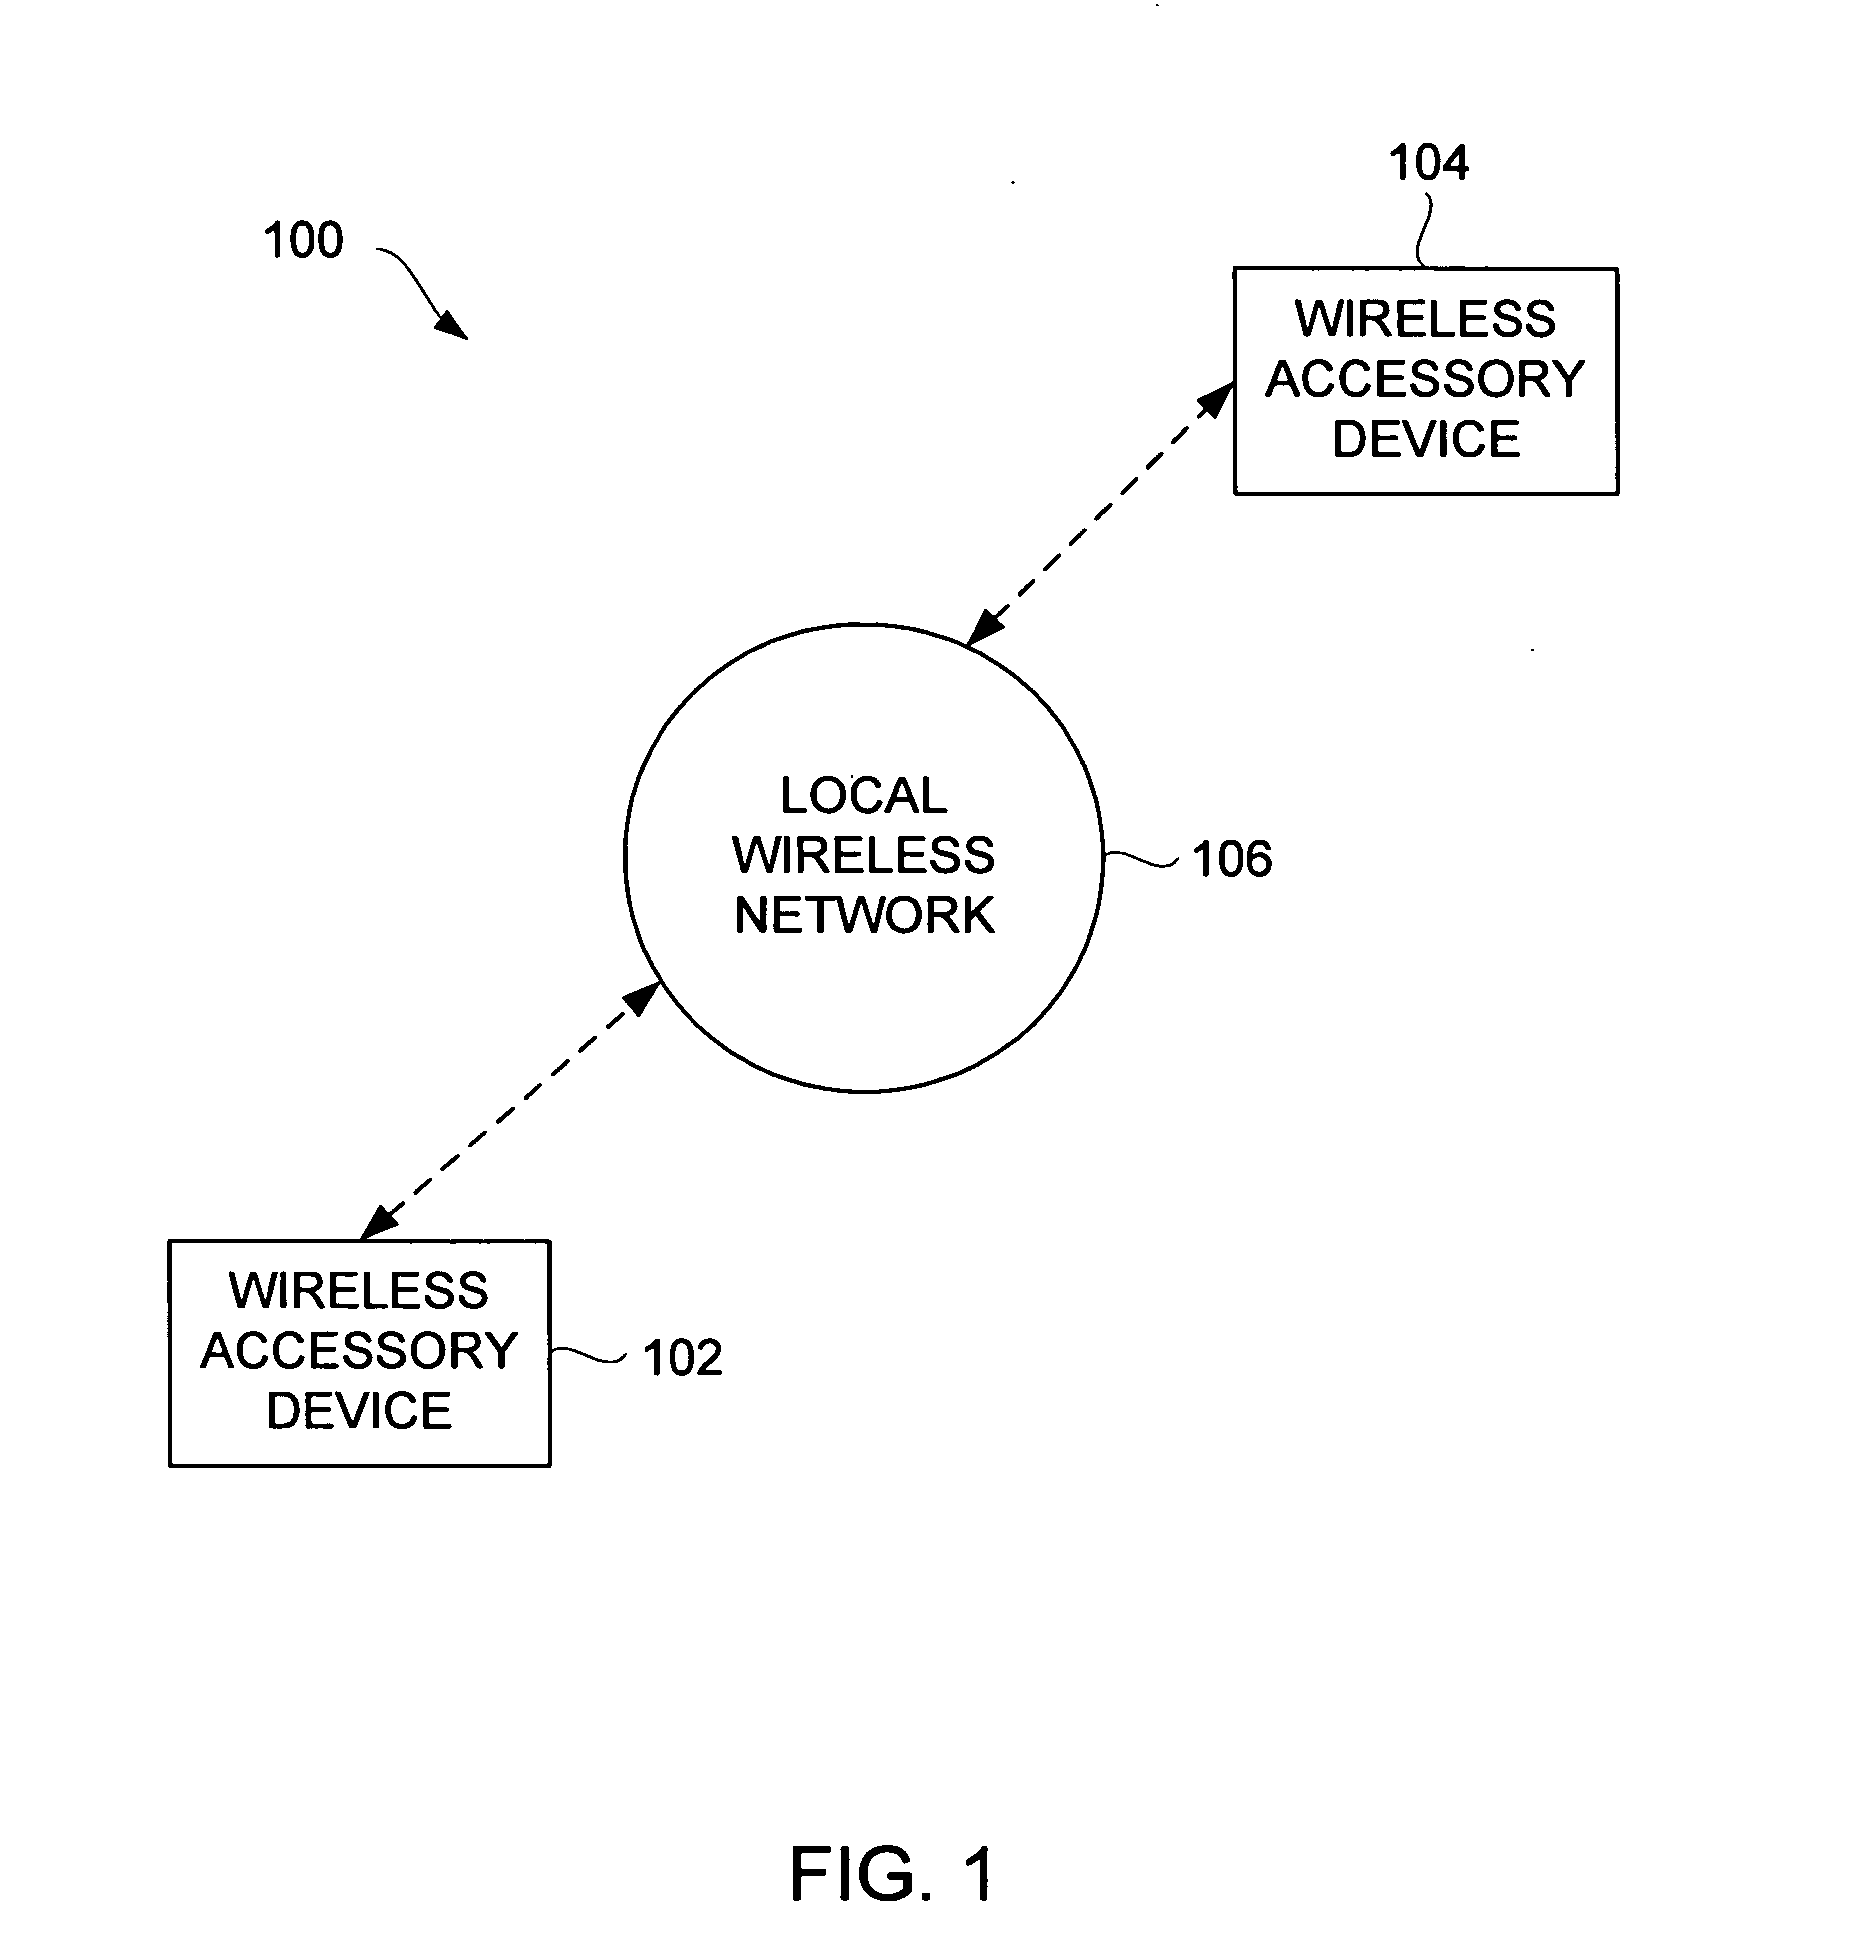 Automated pairing of wireless accessories with host devices